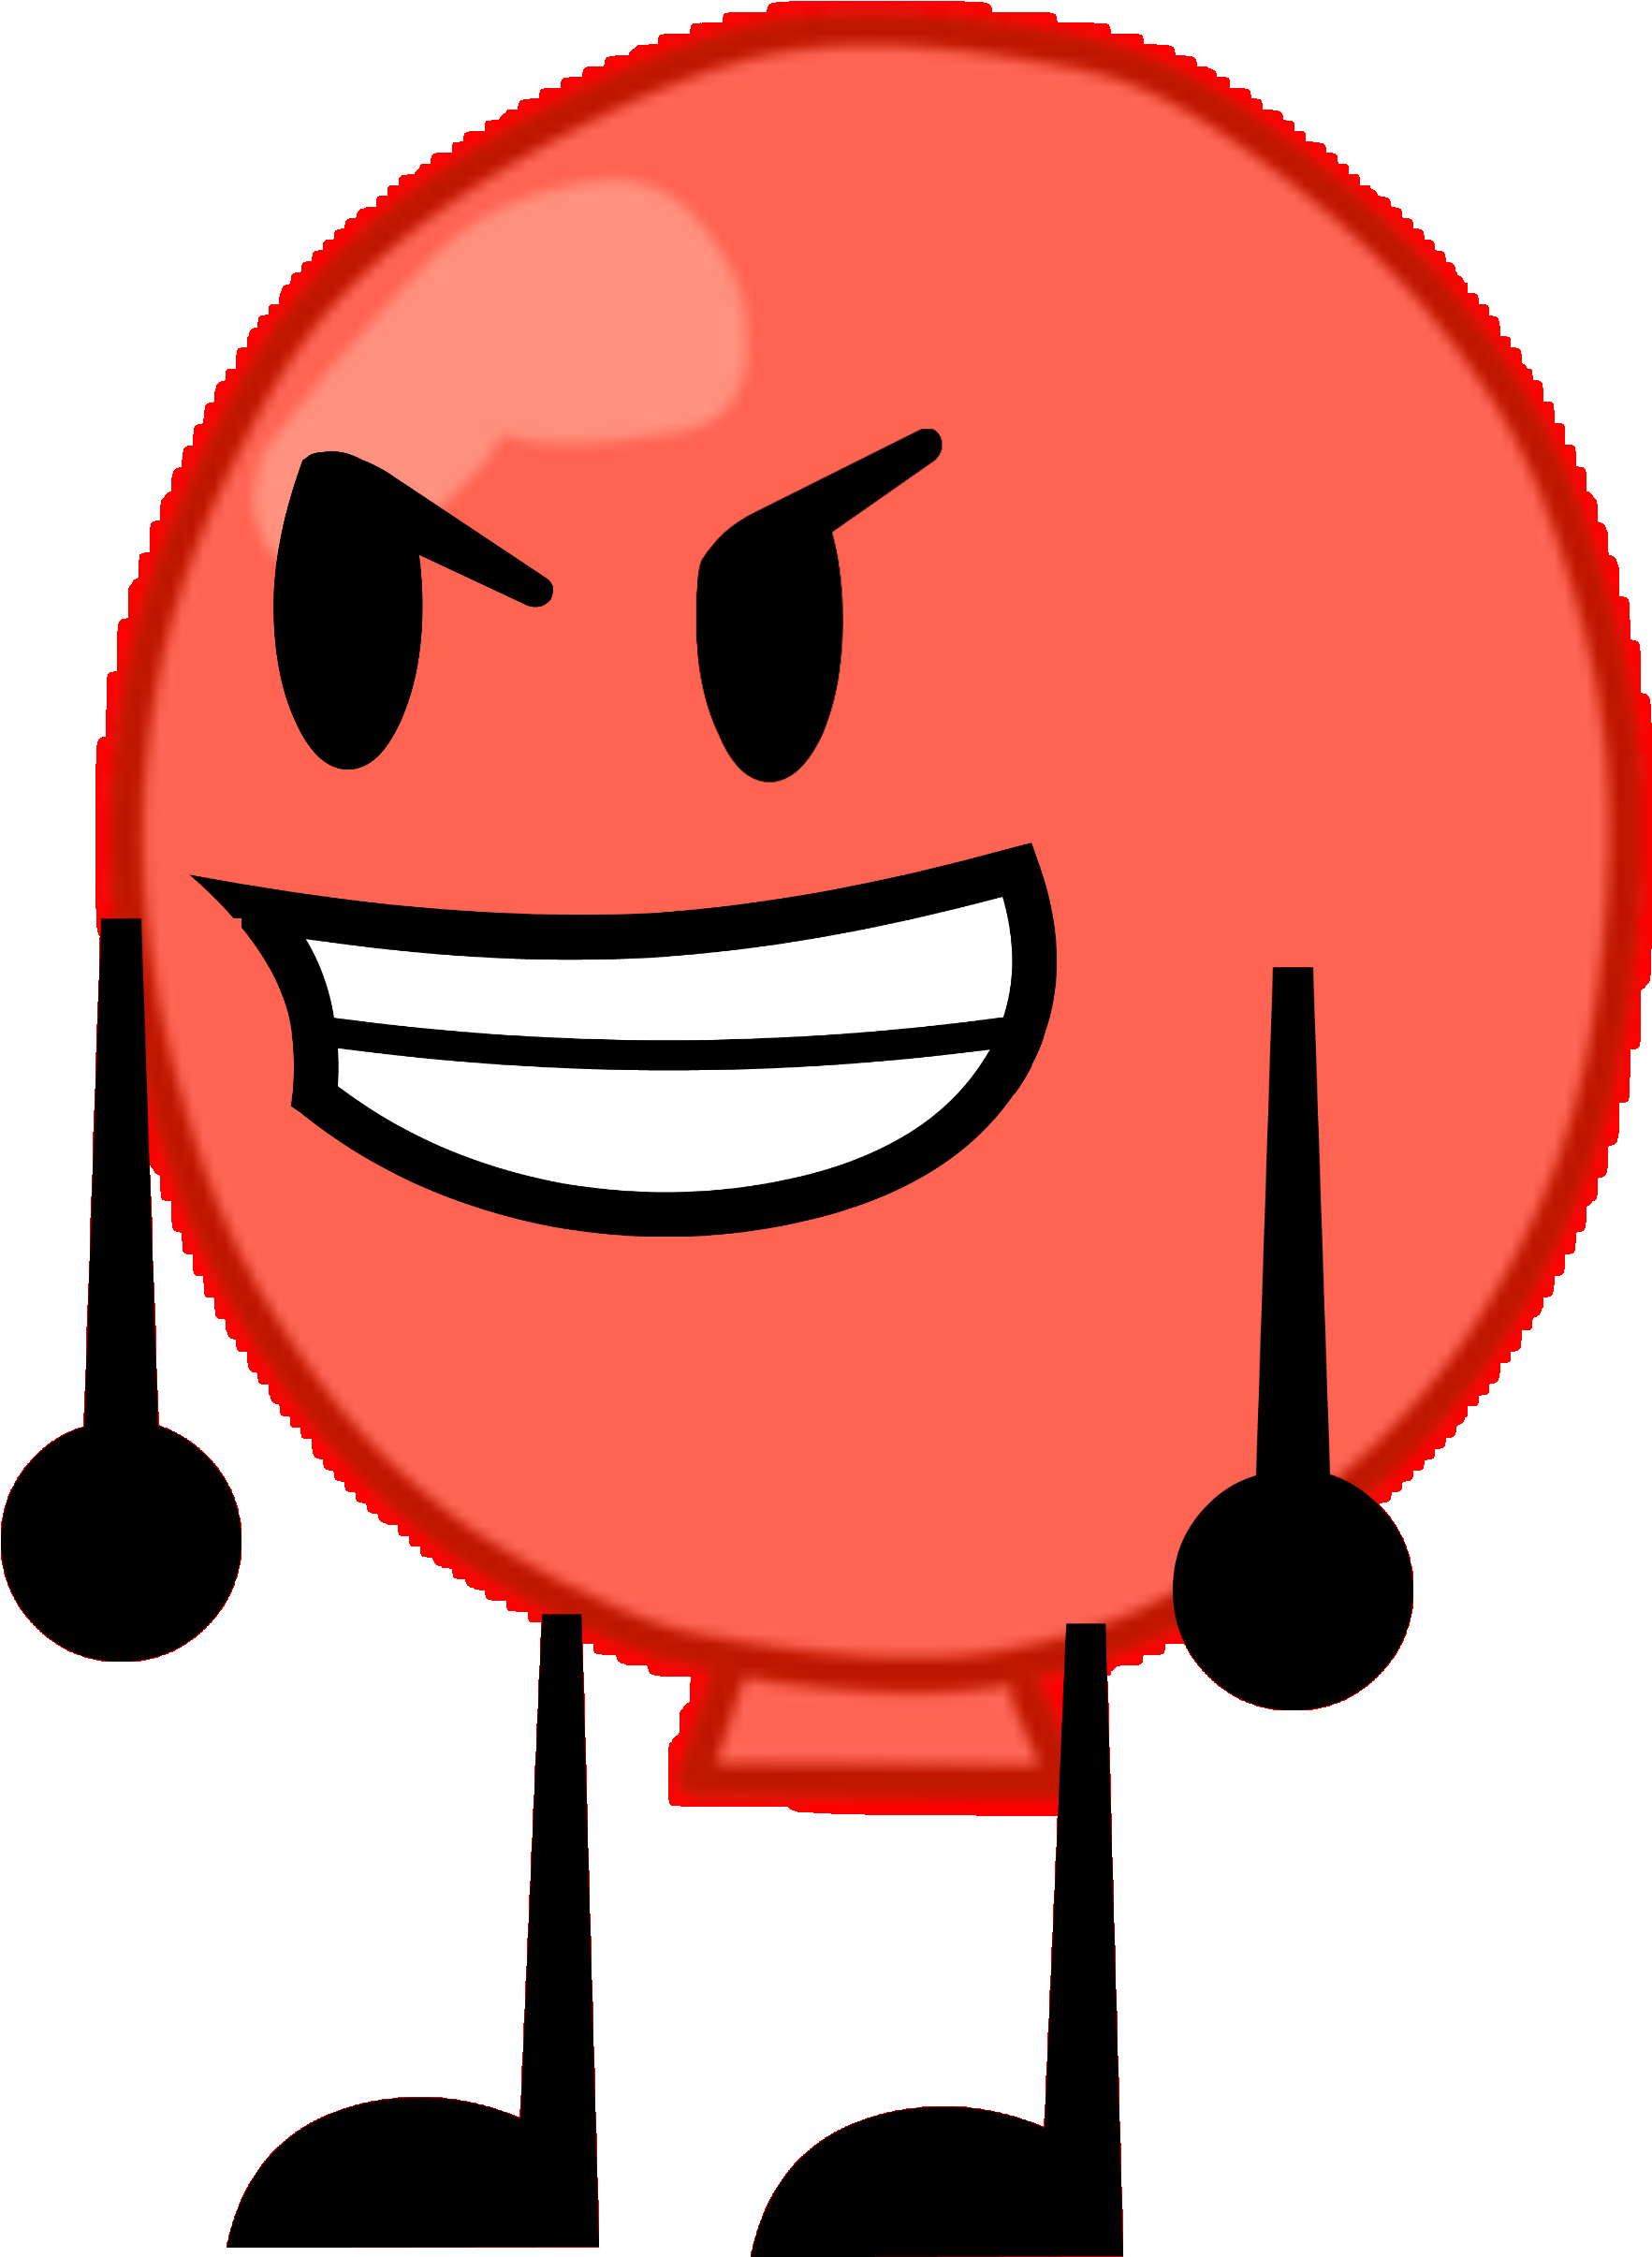 Balloon Smiley Free Transparent PNG Download PNGkey